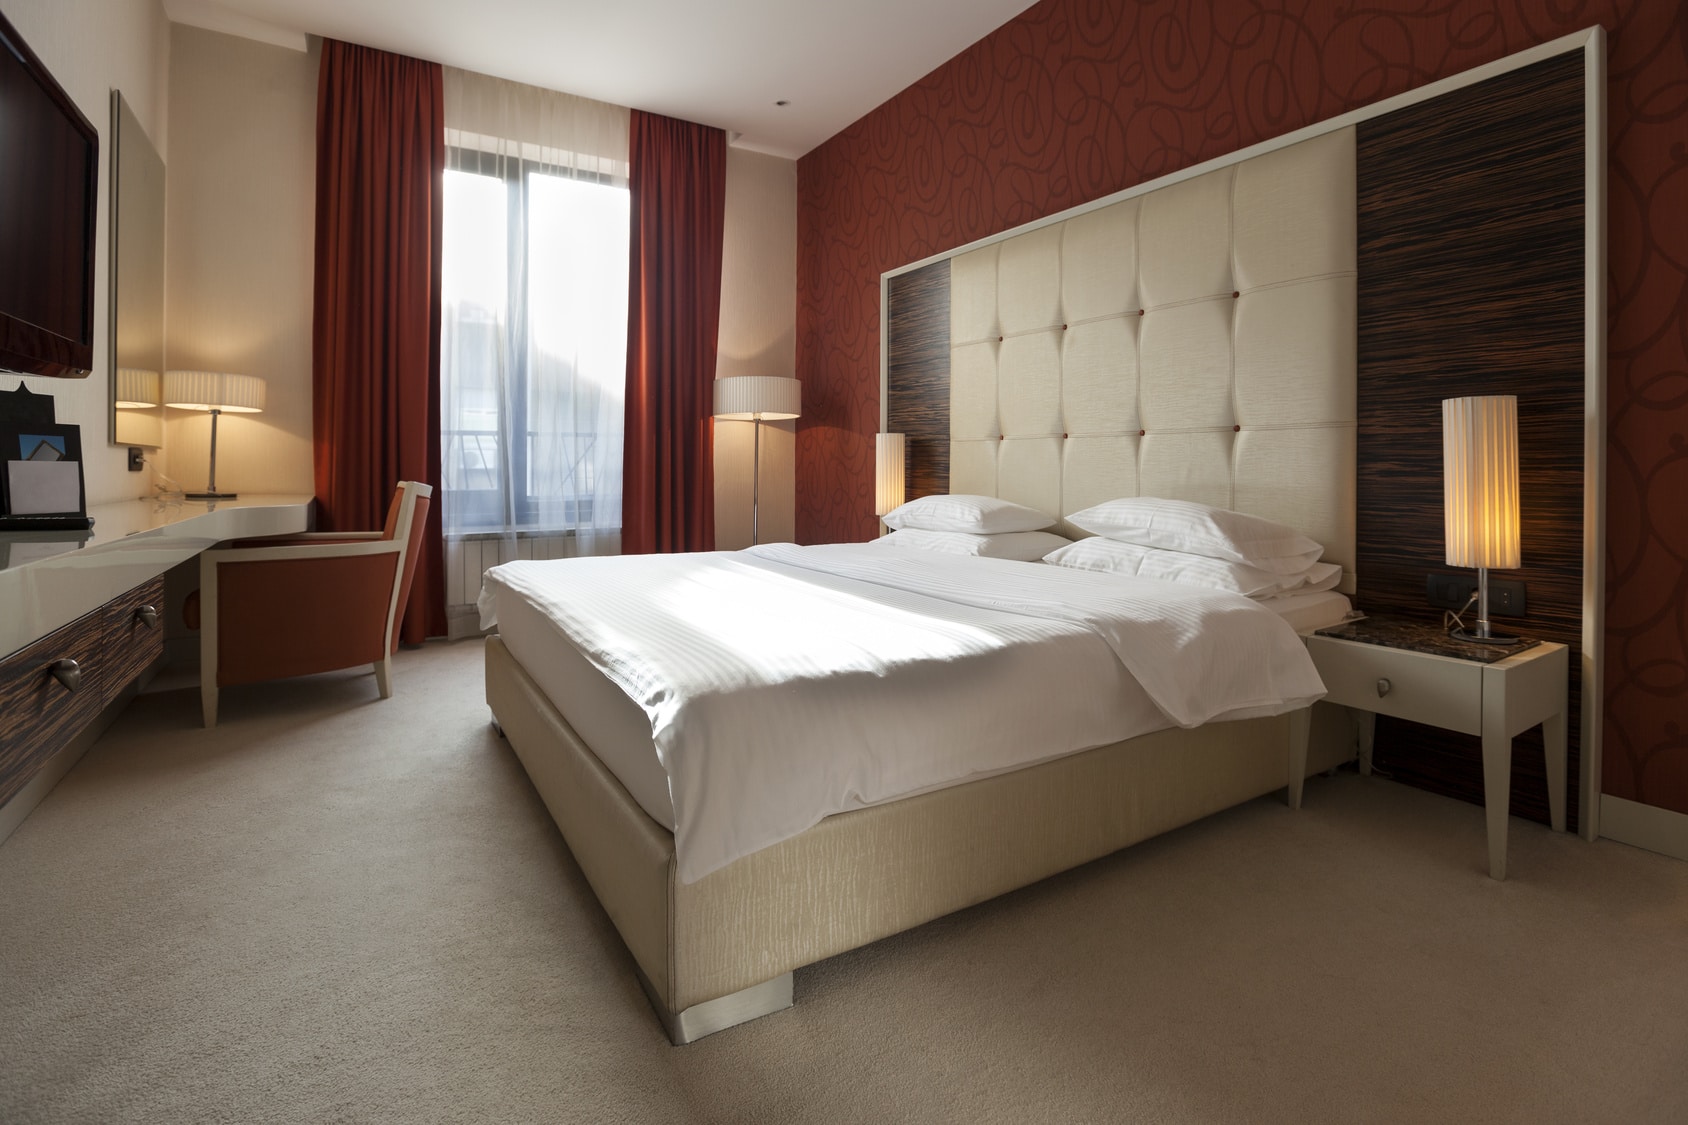 Extended-Stay Hotels Outperform the Rest of the Hospitality Industry